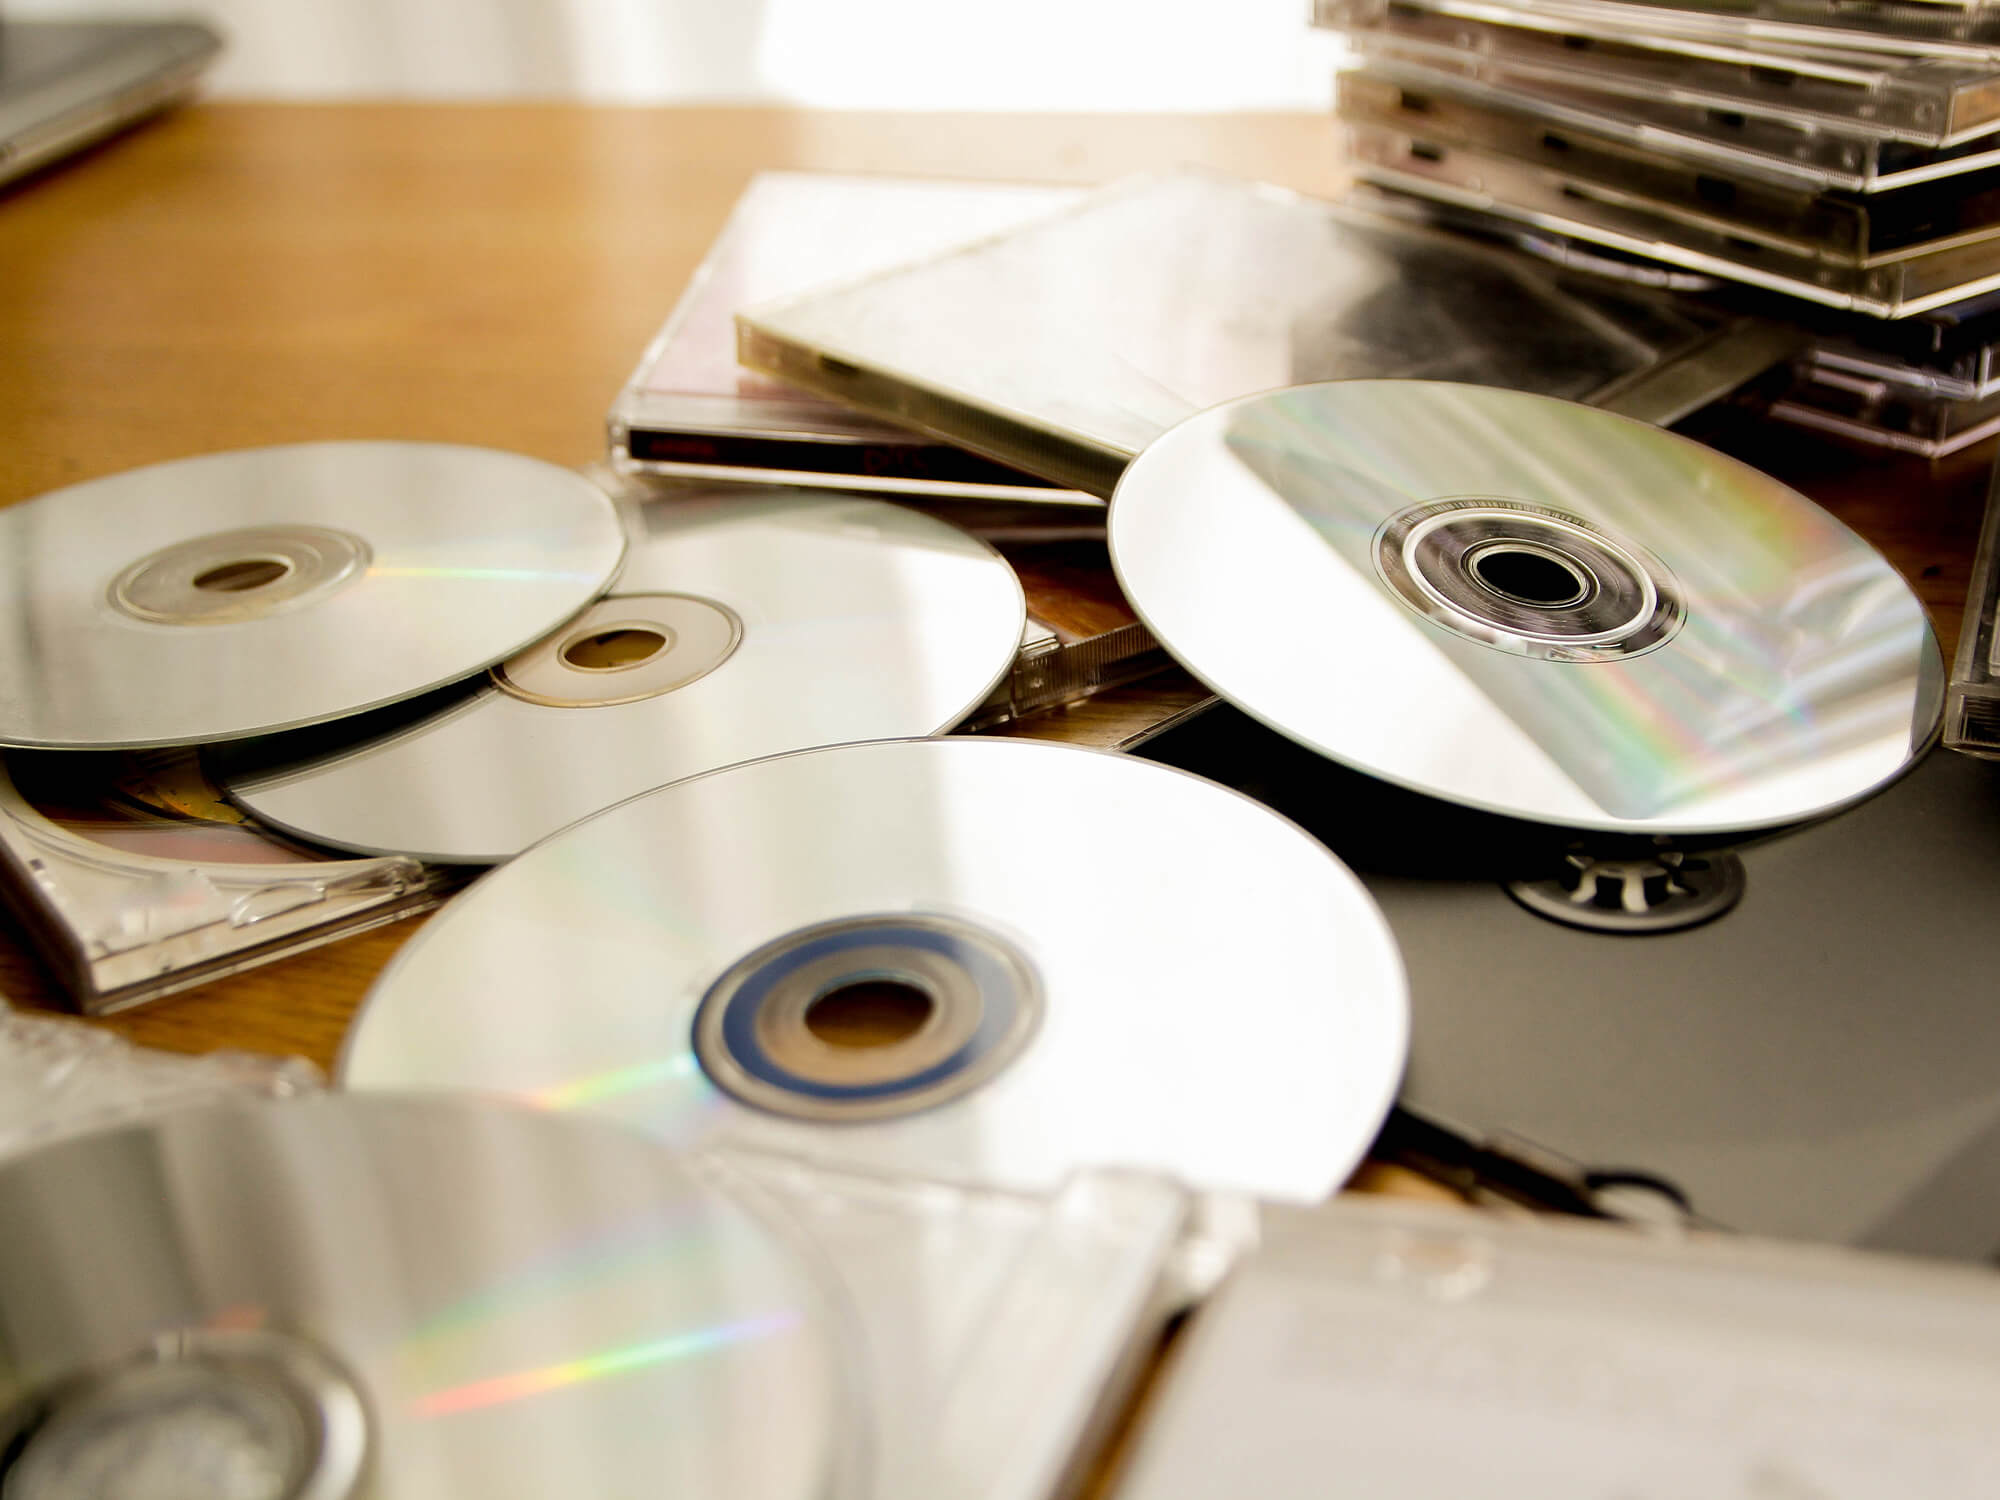 CDs spread out on a table among a stack of plastic CD cases